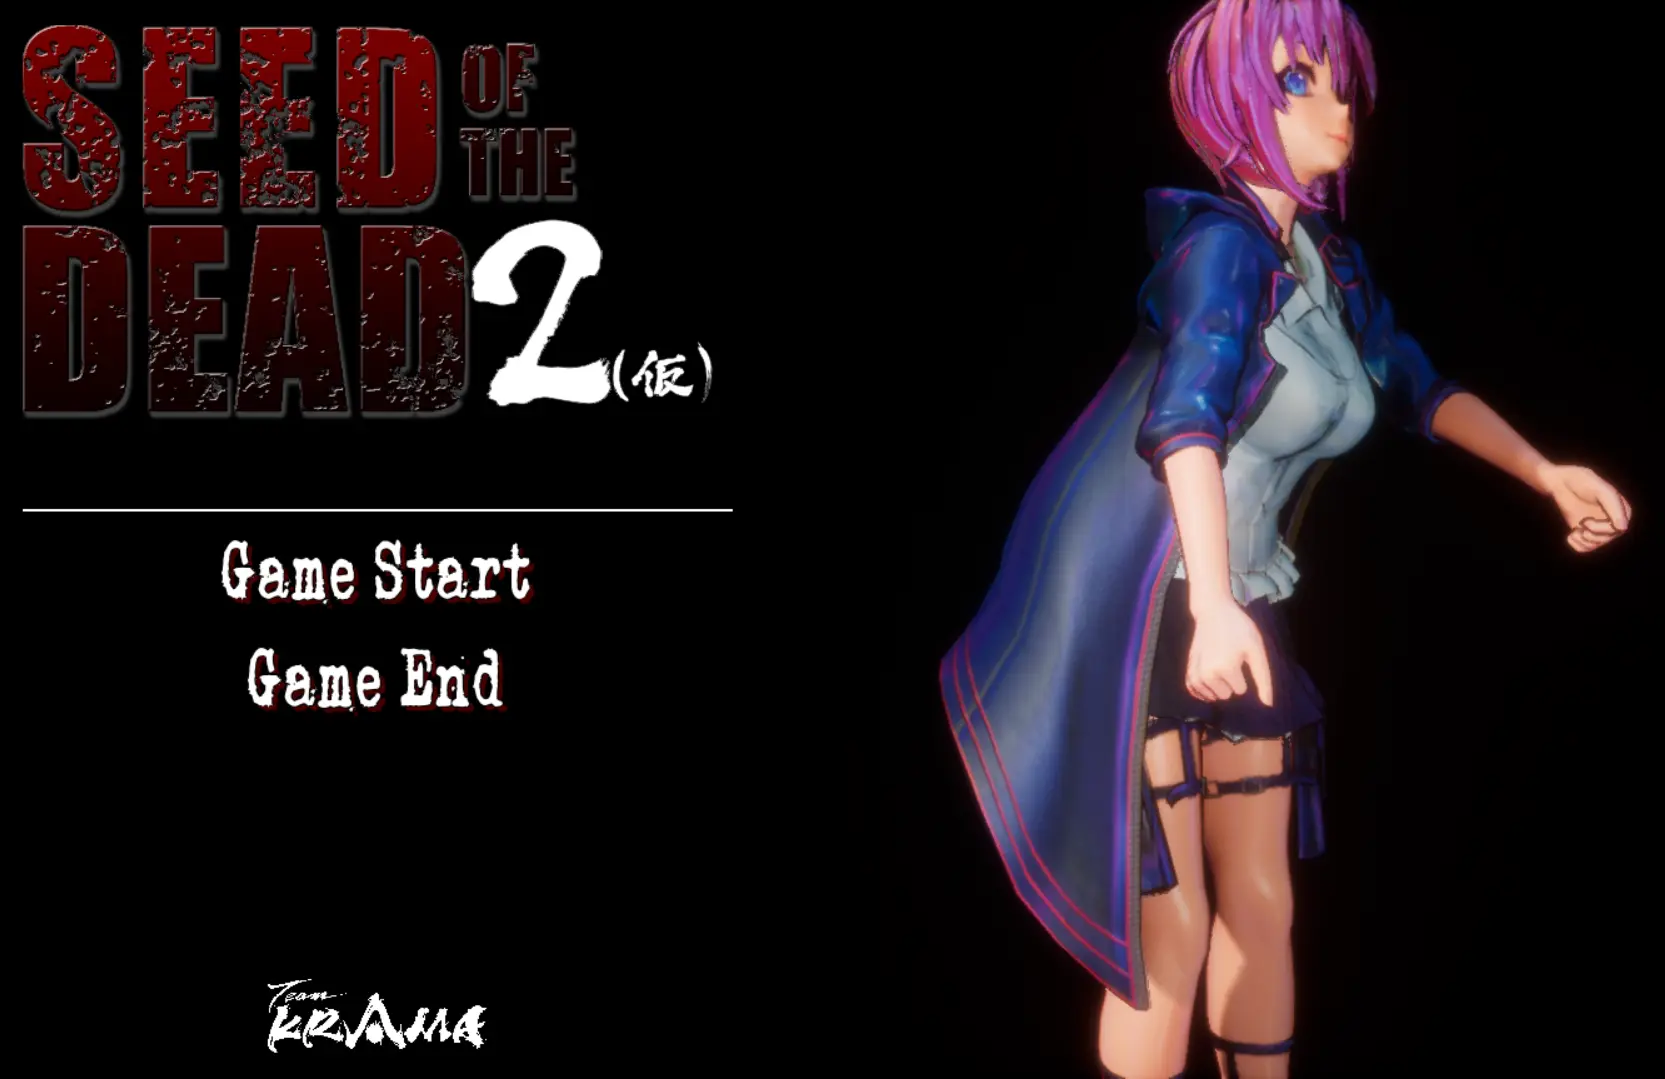 Seed Of The Dead English